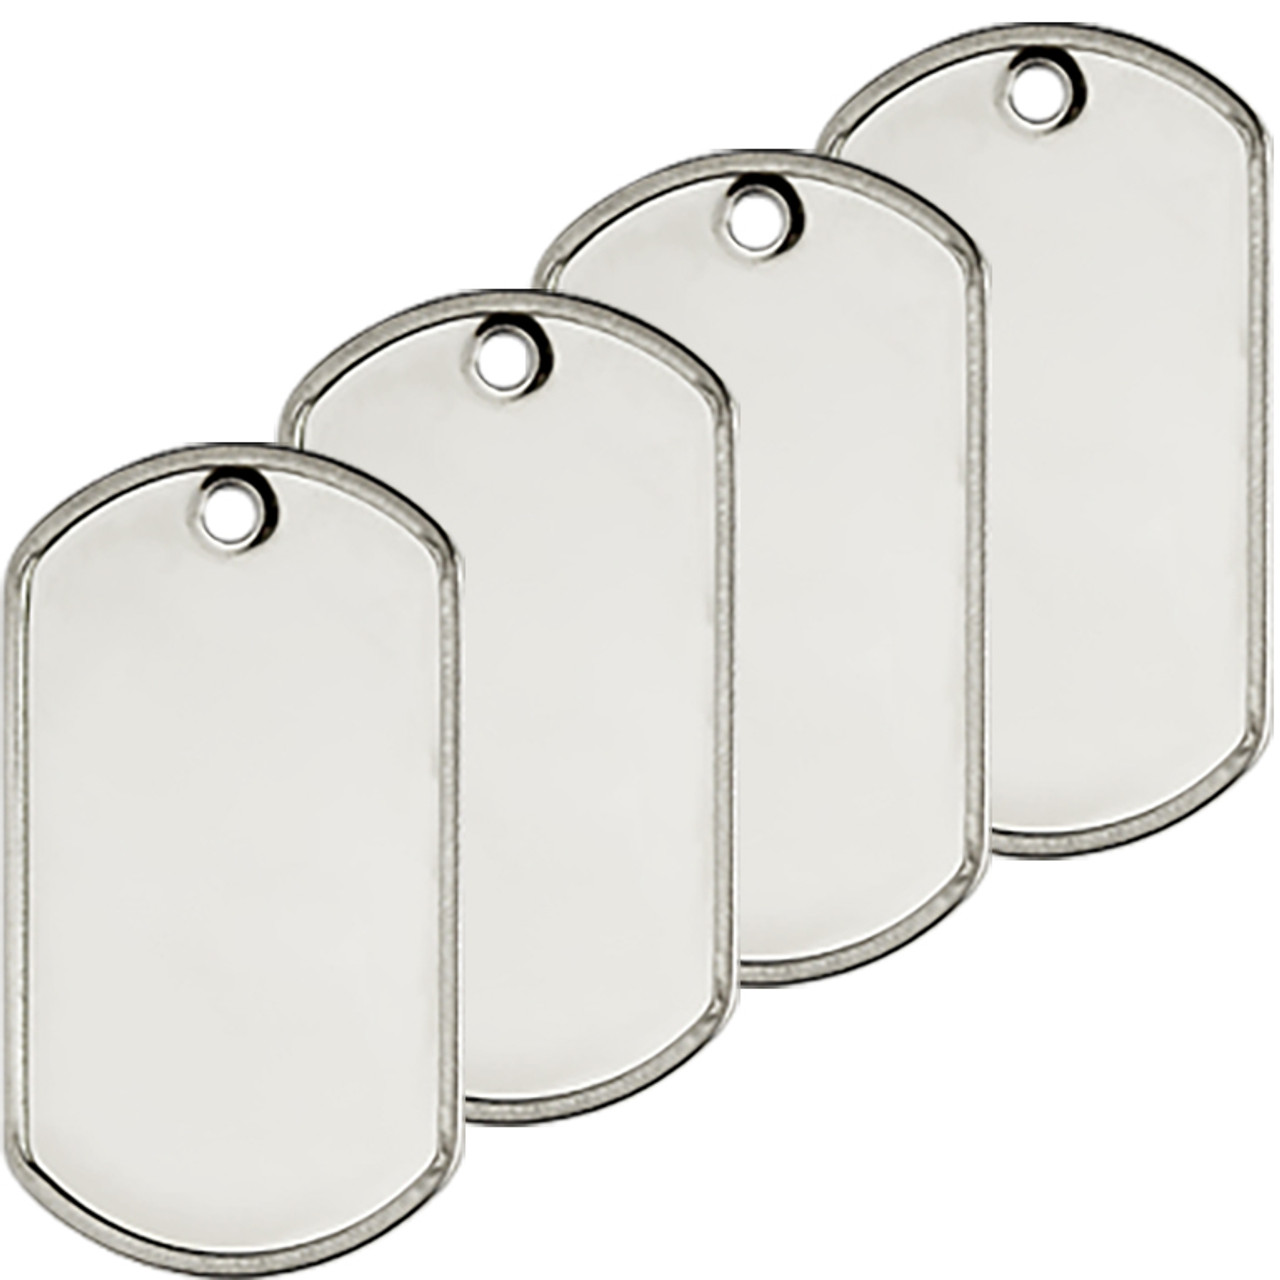 Blank Dog Tags - Rolled Edge Stainless Steel - Shiny Finish